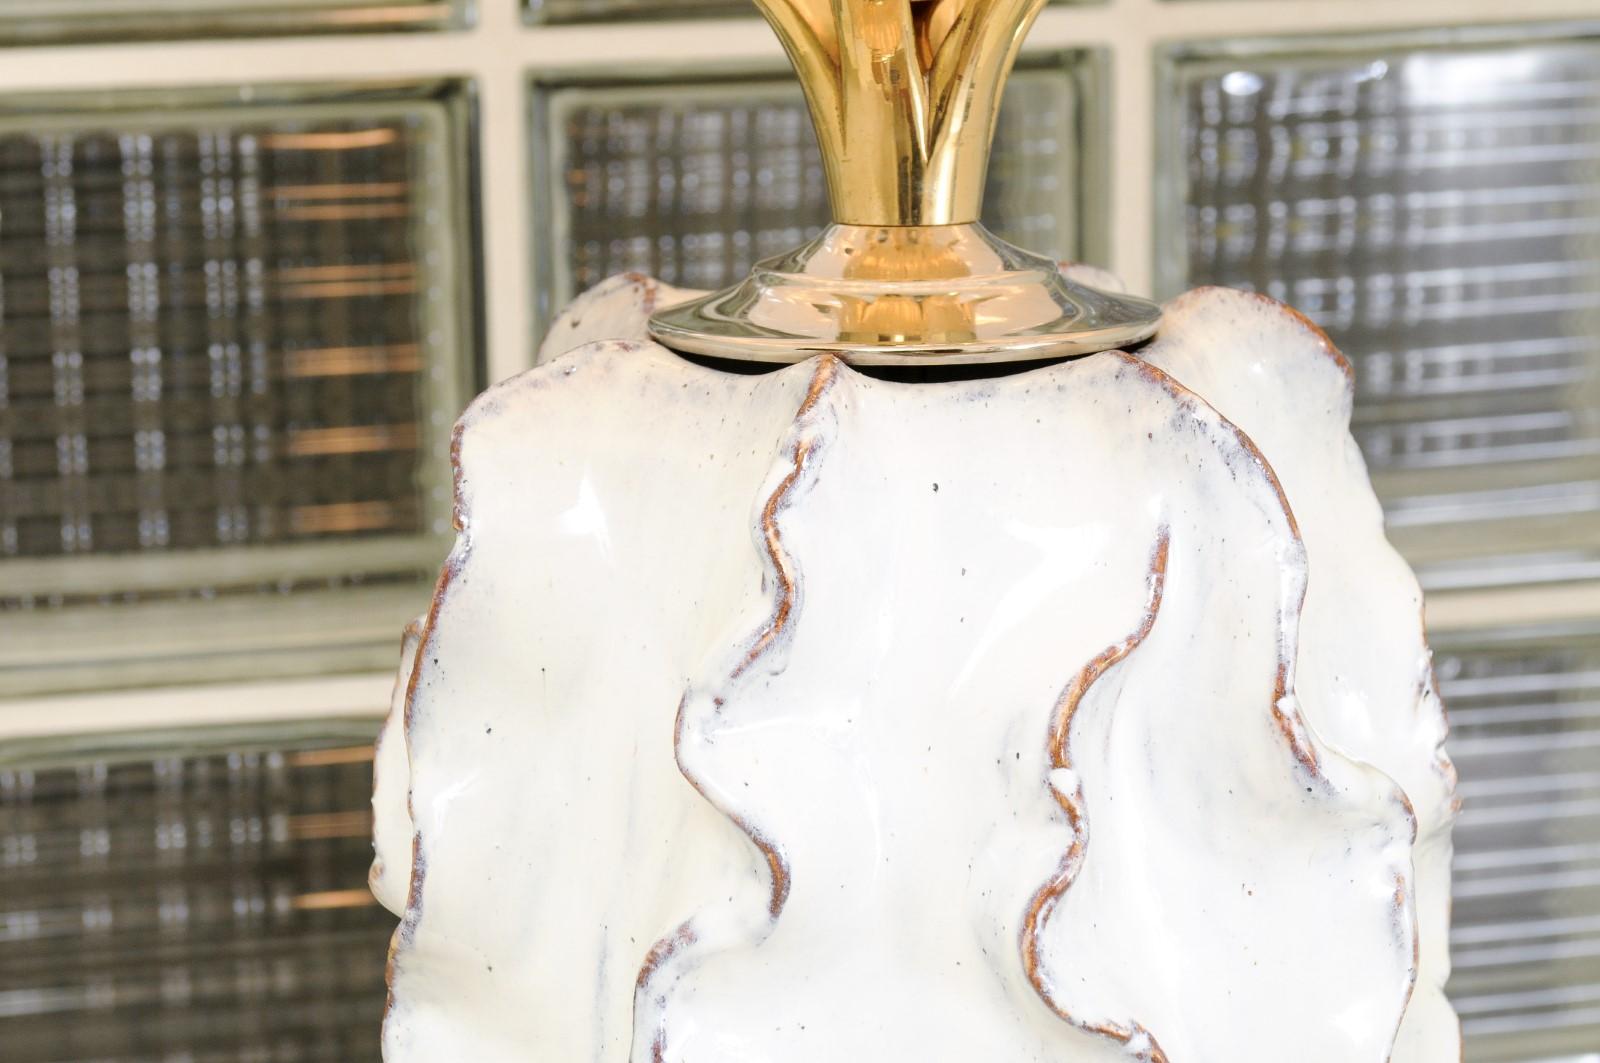 Brass Exquisite Pair of Handmade Glaze Portuguese Ceramic Vessels as New Custom Lamps For Sale